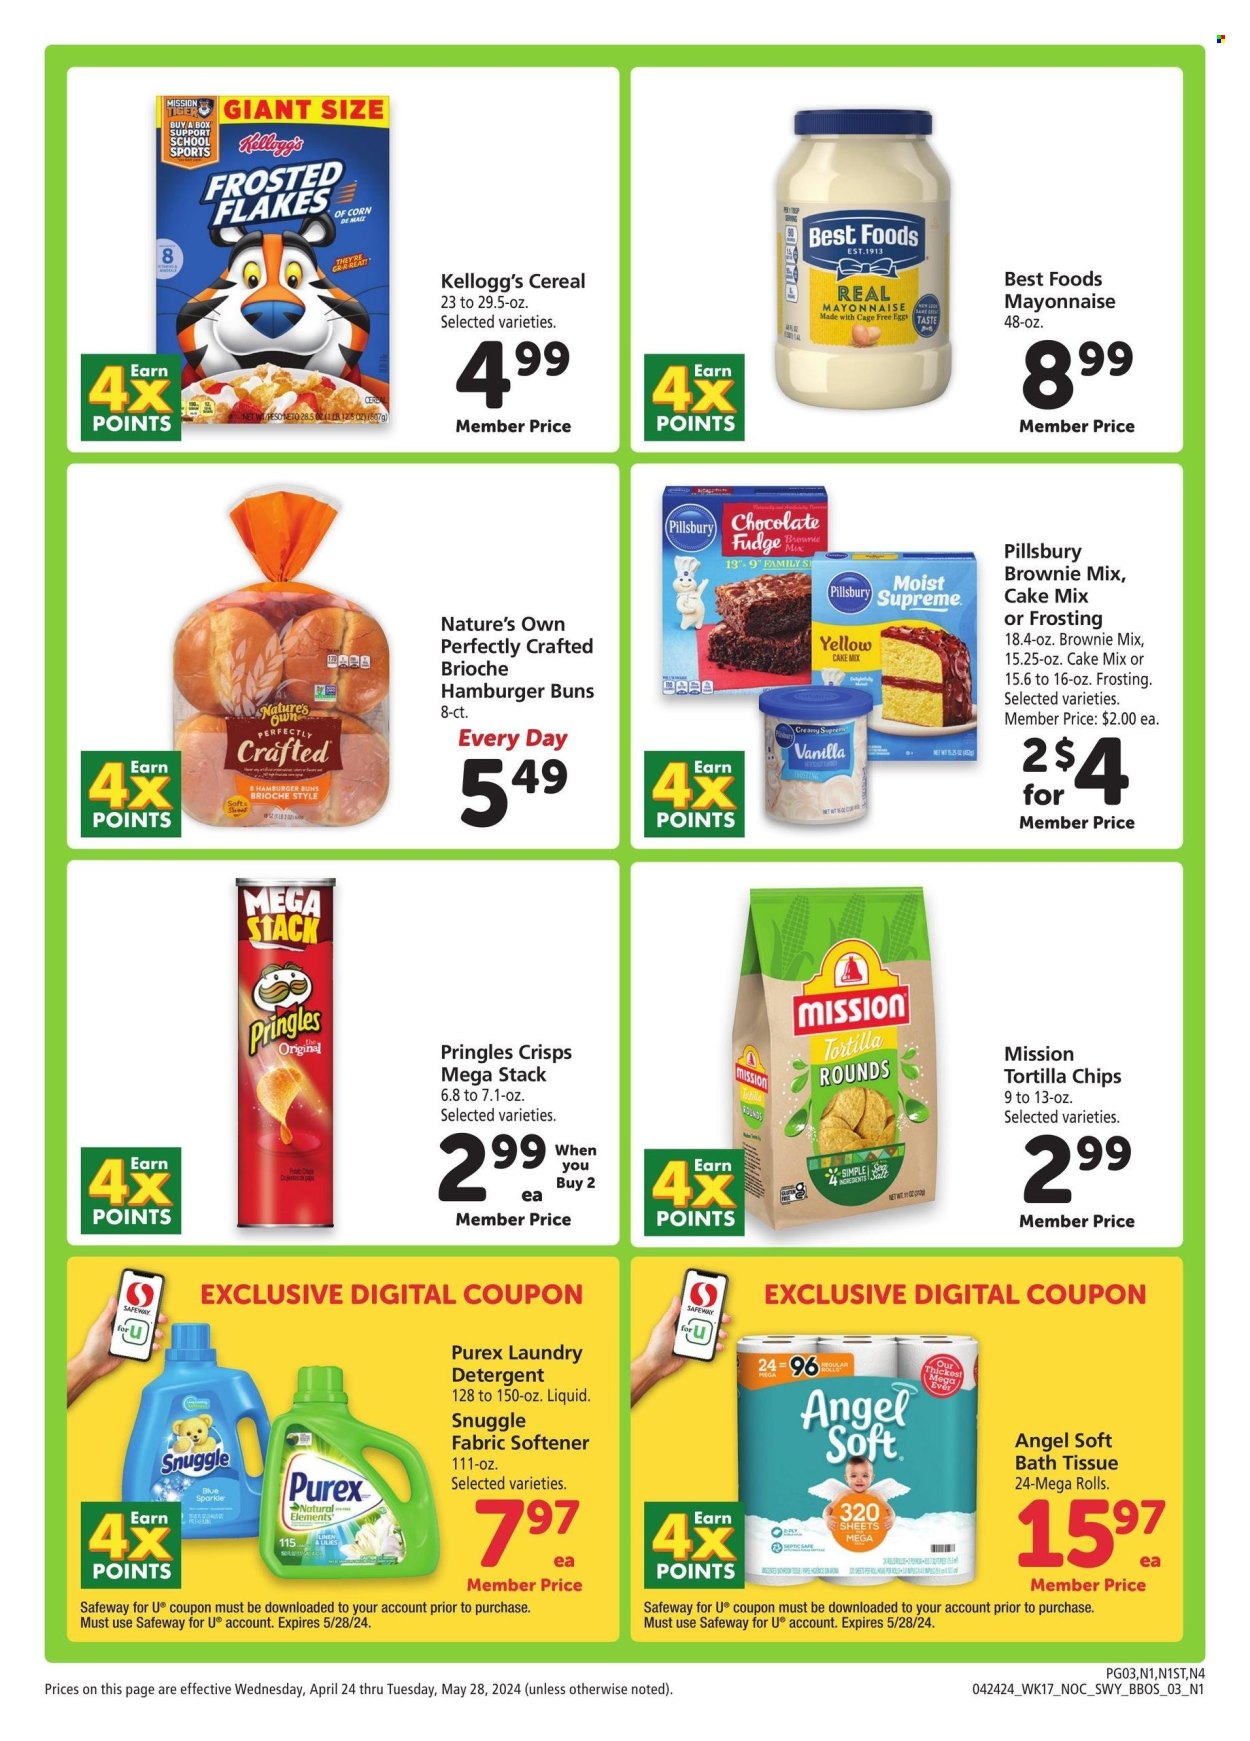 thumbnail - Safeway Flyer - 04/24/2024 - 05/28/2024 - Sales products - buns, burger buns, brioche, Pillsbury, cage free eggs, mayonnaise, Kellogg's, tortilla chips, Pringles, salty snack, crisps, frosting, baking mix, cereals, Frosted Flakes, bath tissue, detergent, Snuggle, fabric softener, laundry detergent, Purex, Nature's Own, eggs. Page 3.